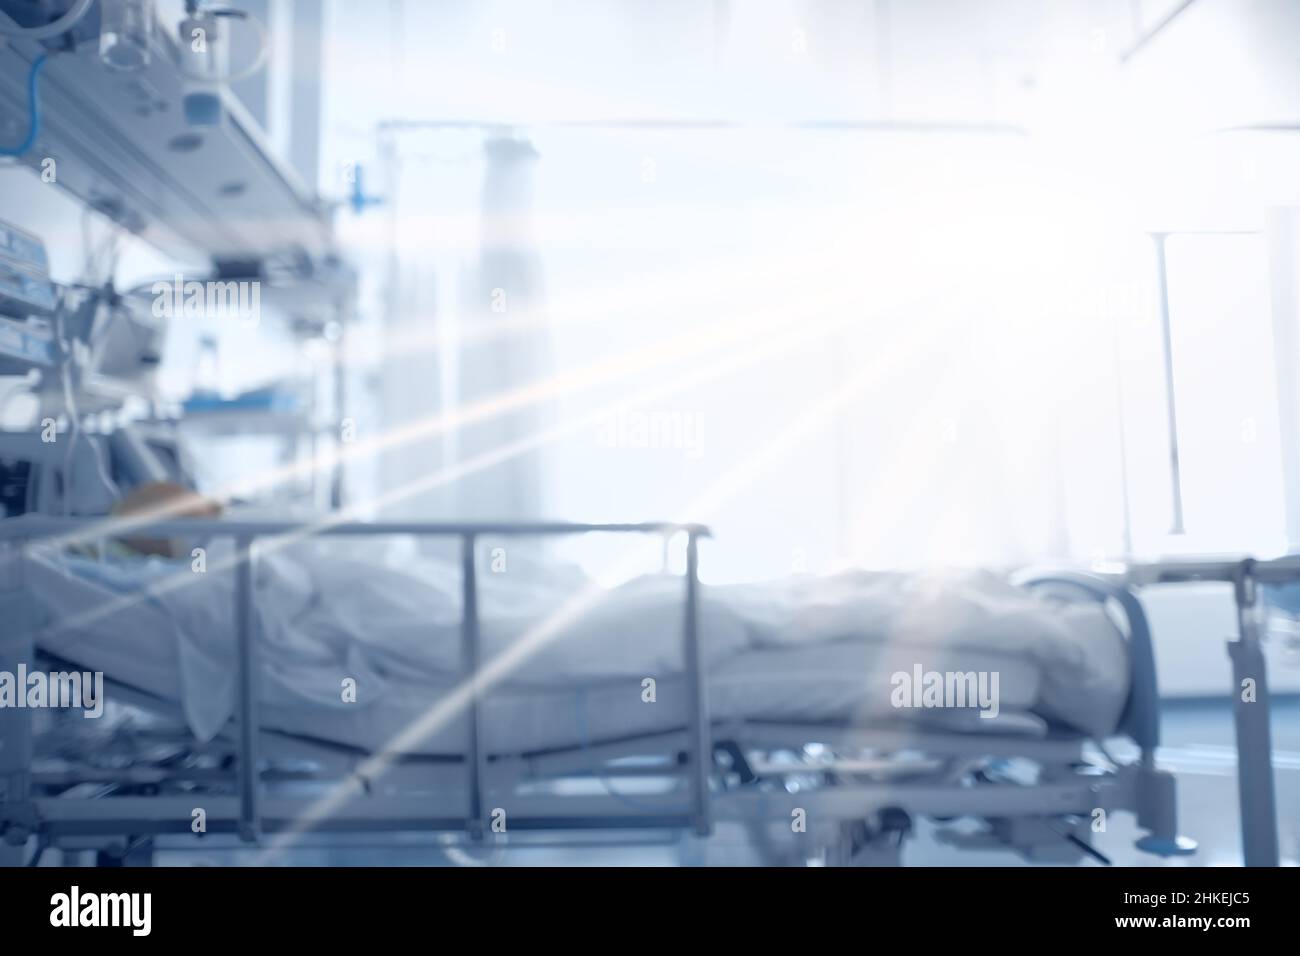 Flash of light illuminating a patient in intensive care, concept of patient emerging from coma. Stock Photo